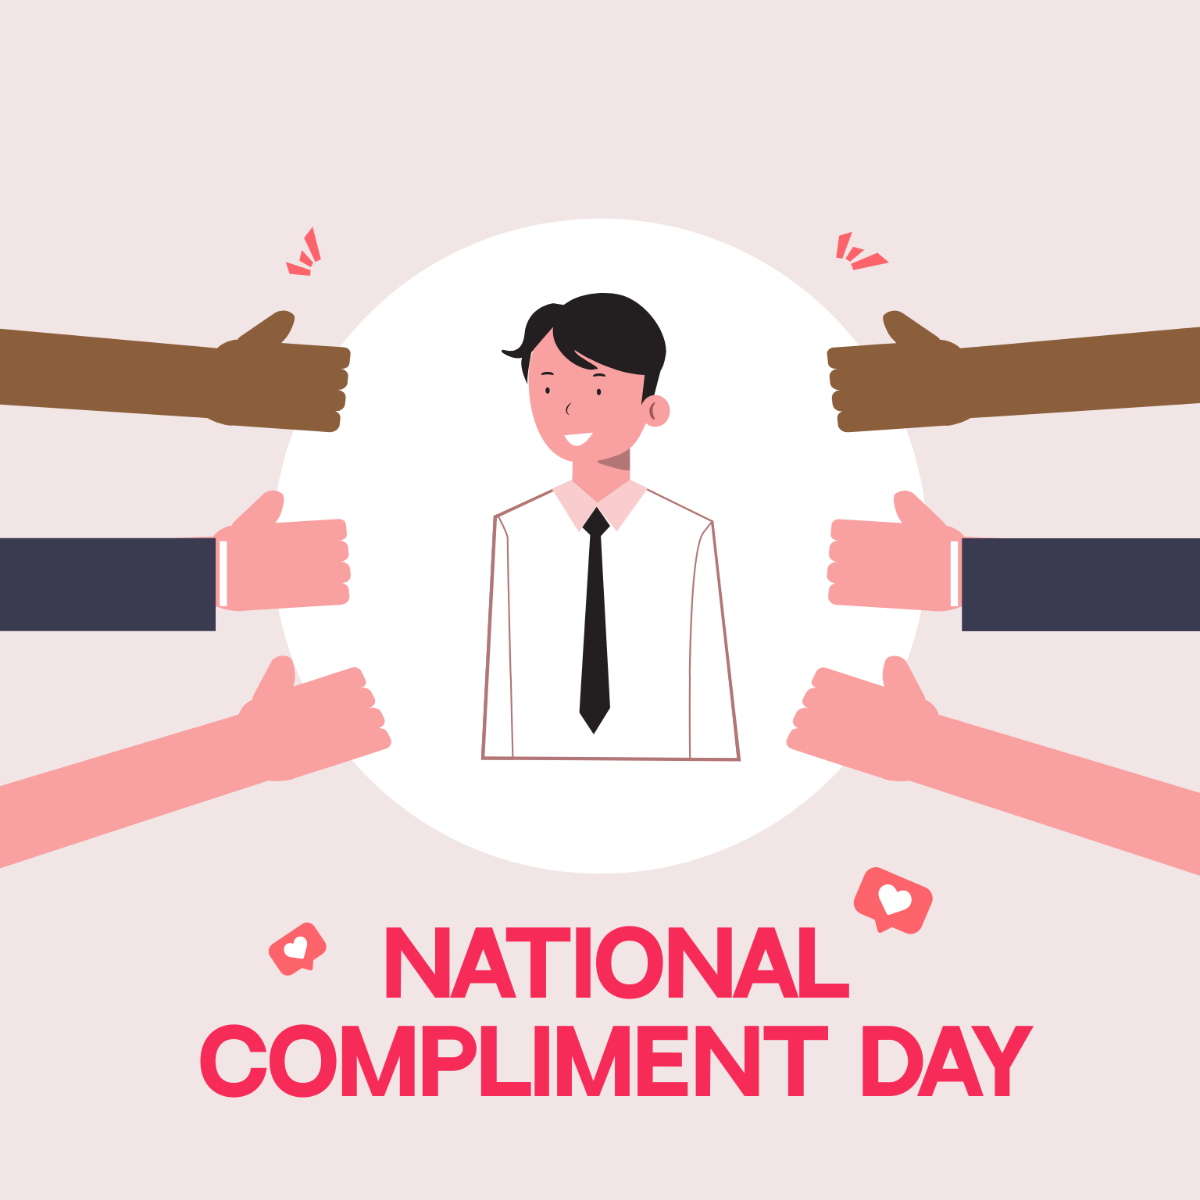 National Compliment Day Illustration Template